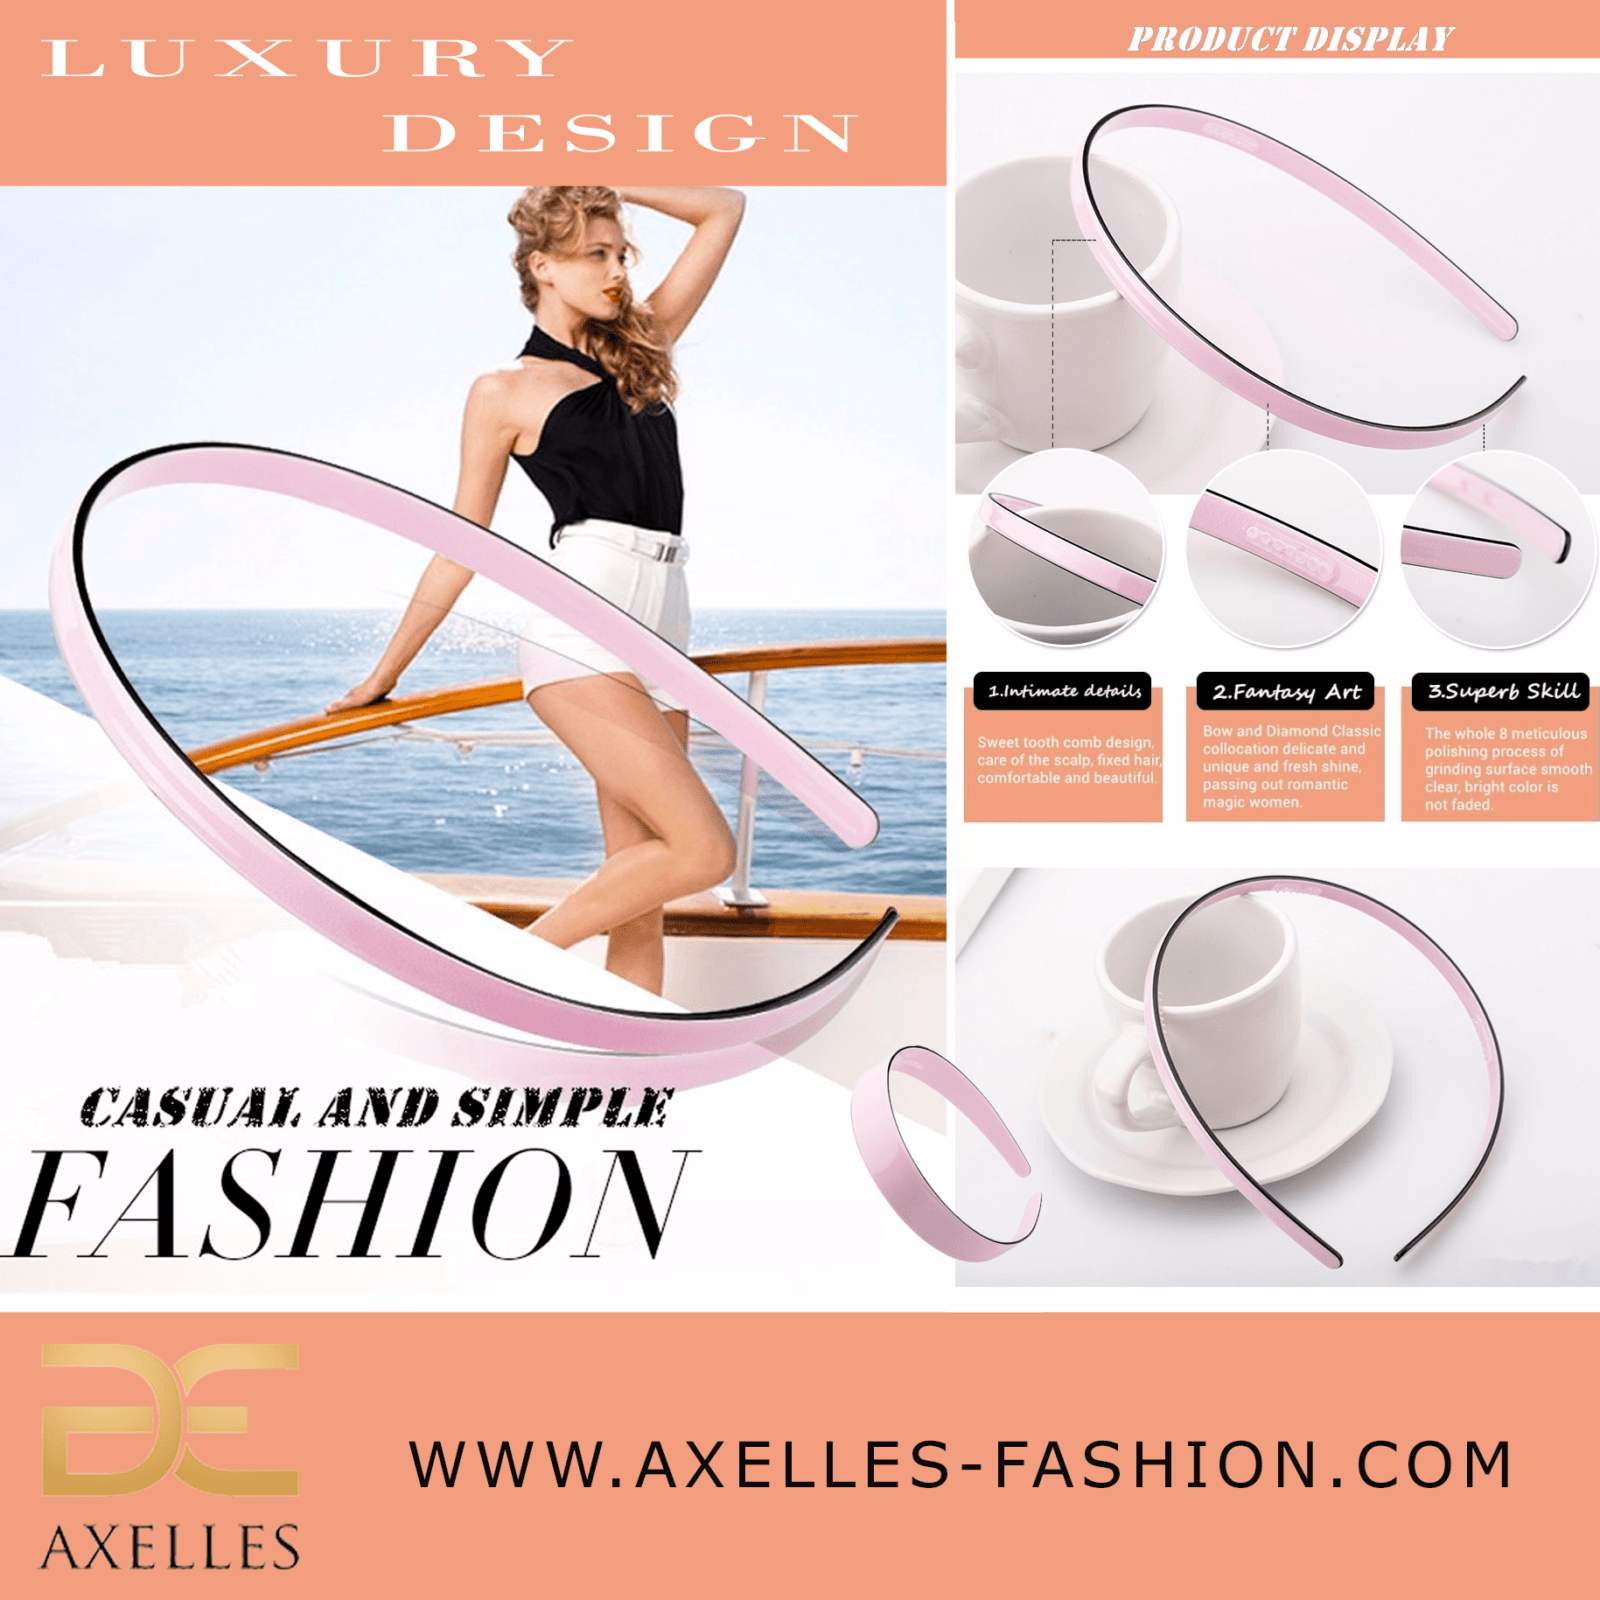 Luxury Hair Accessories Simple collection hairband headband product info www.axelles-fashion.com